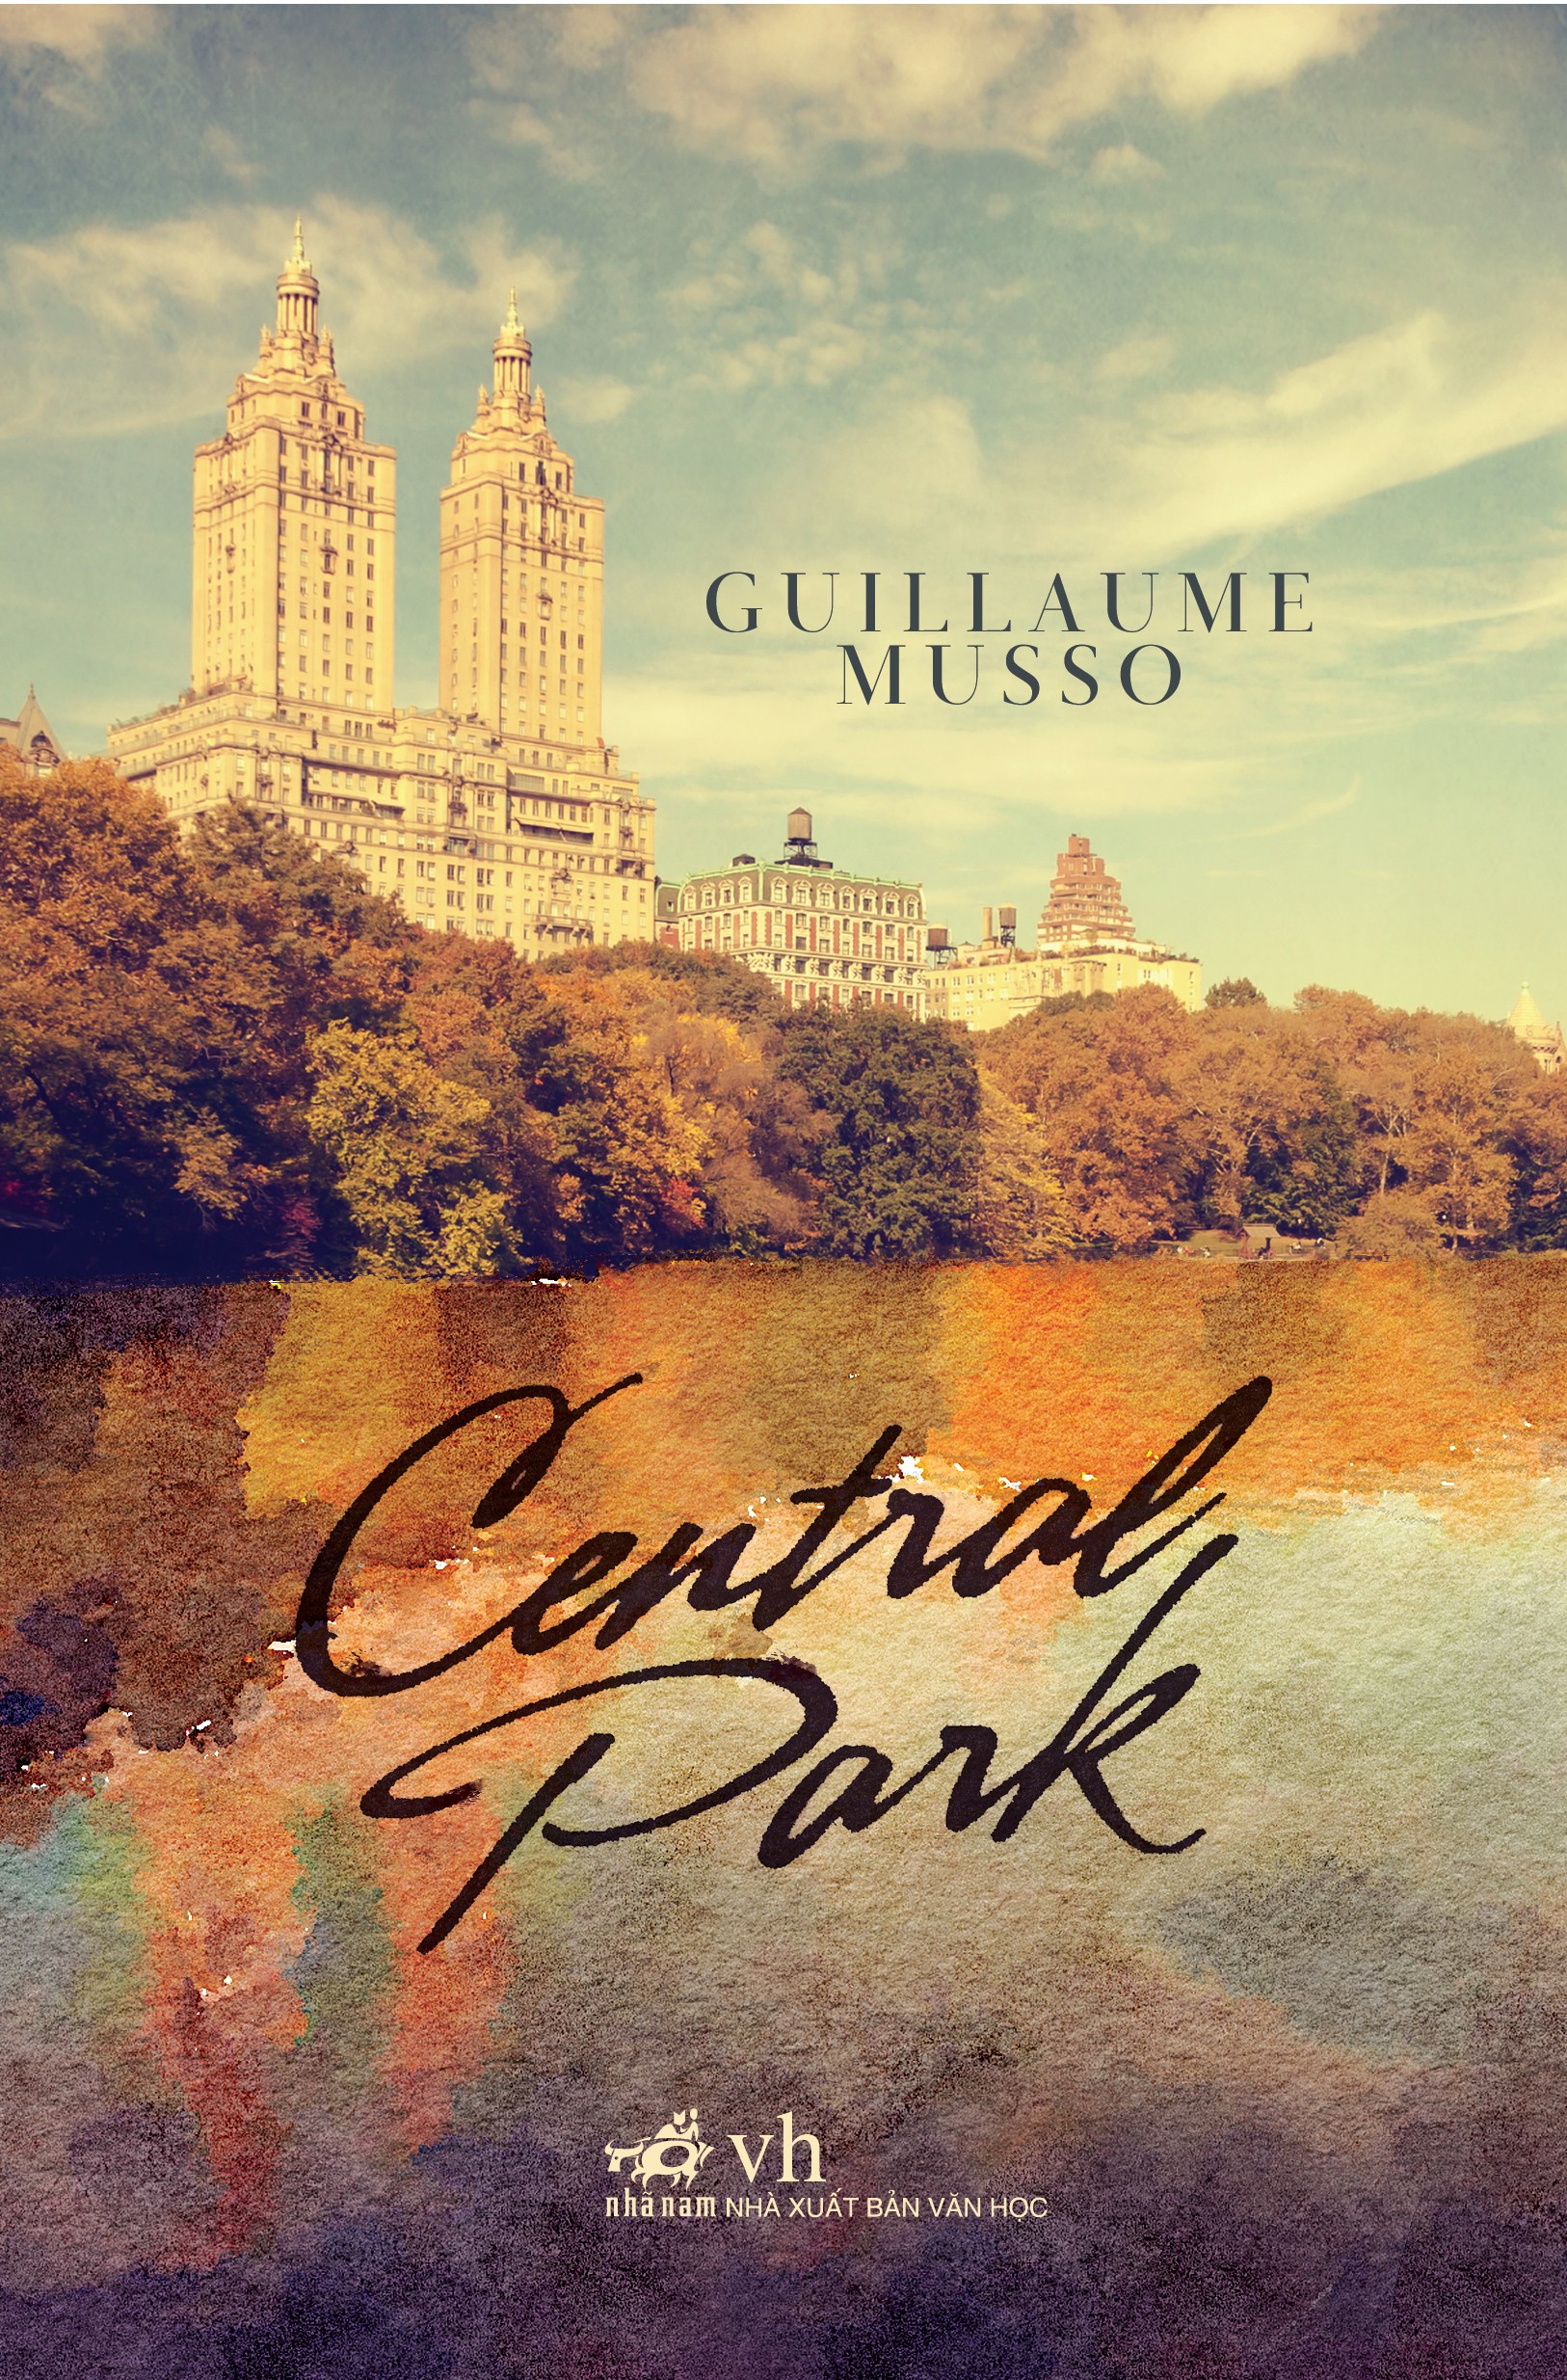 Guillaume Musso's Latest Novel Is Set In Central Park